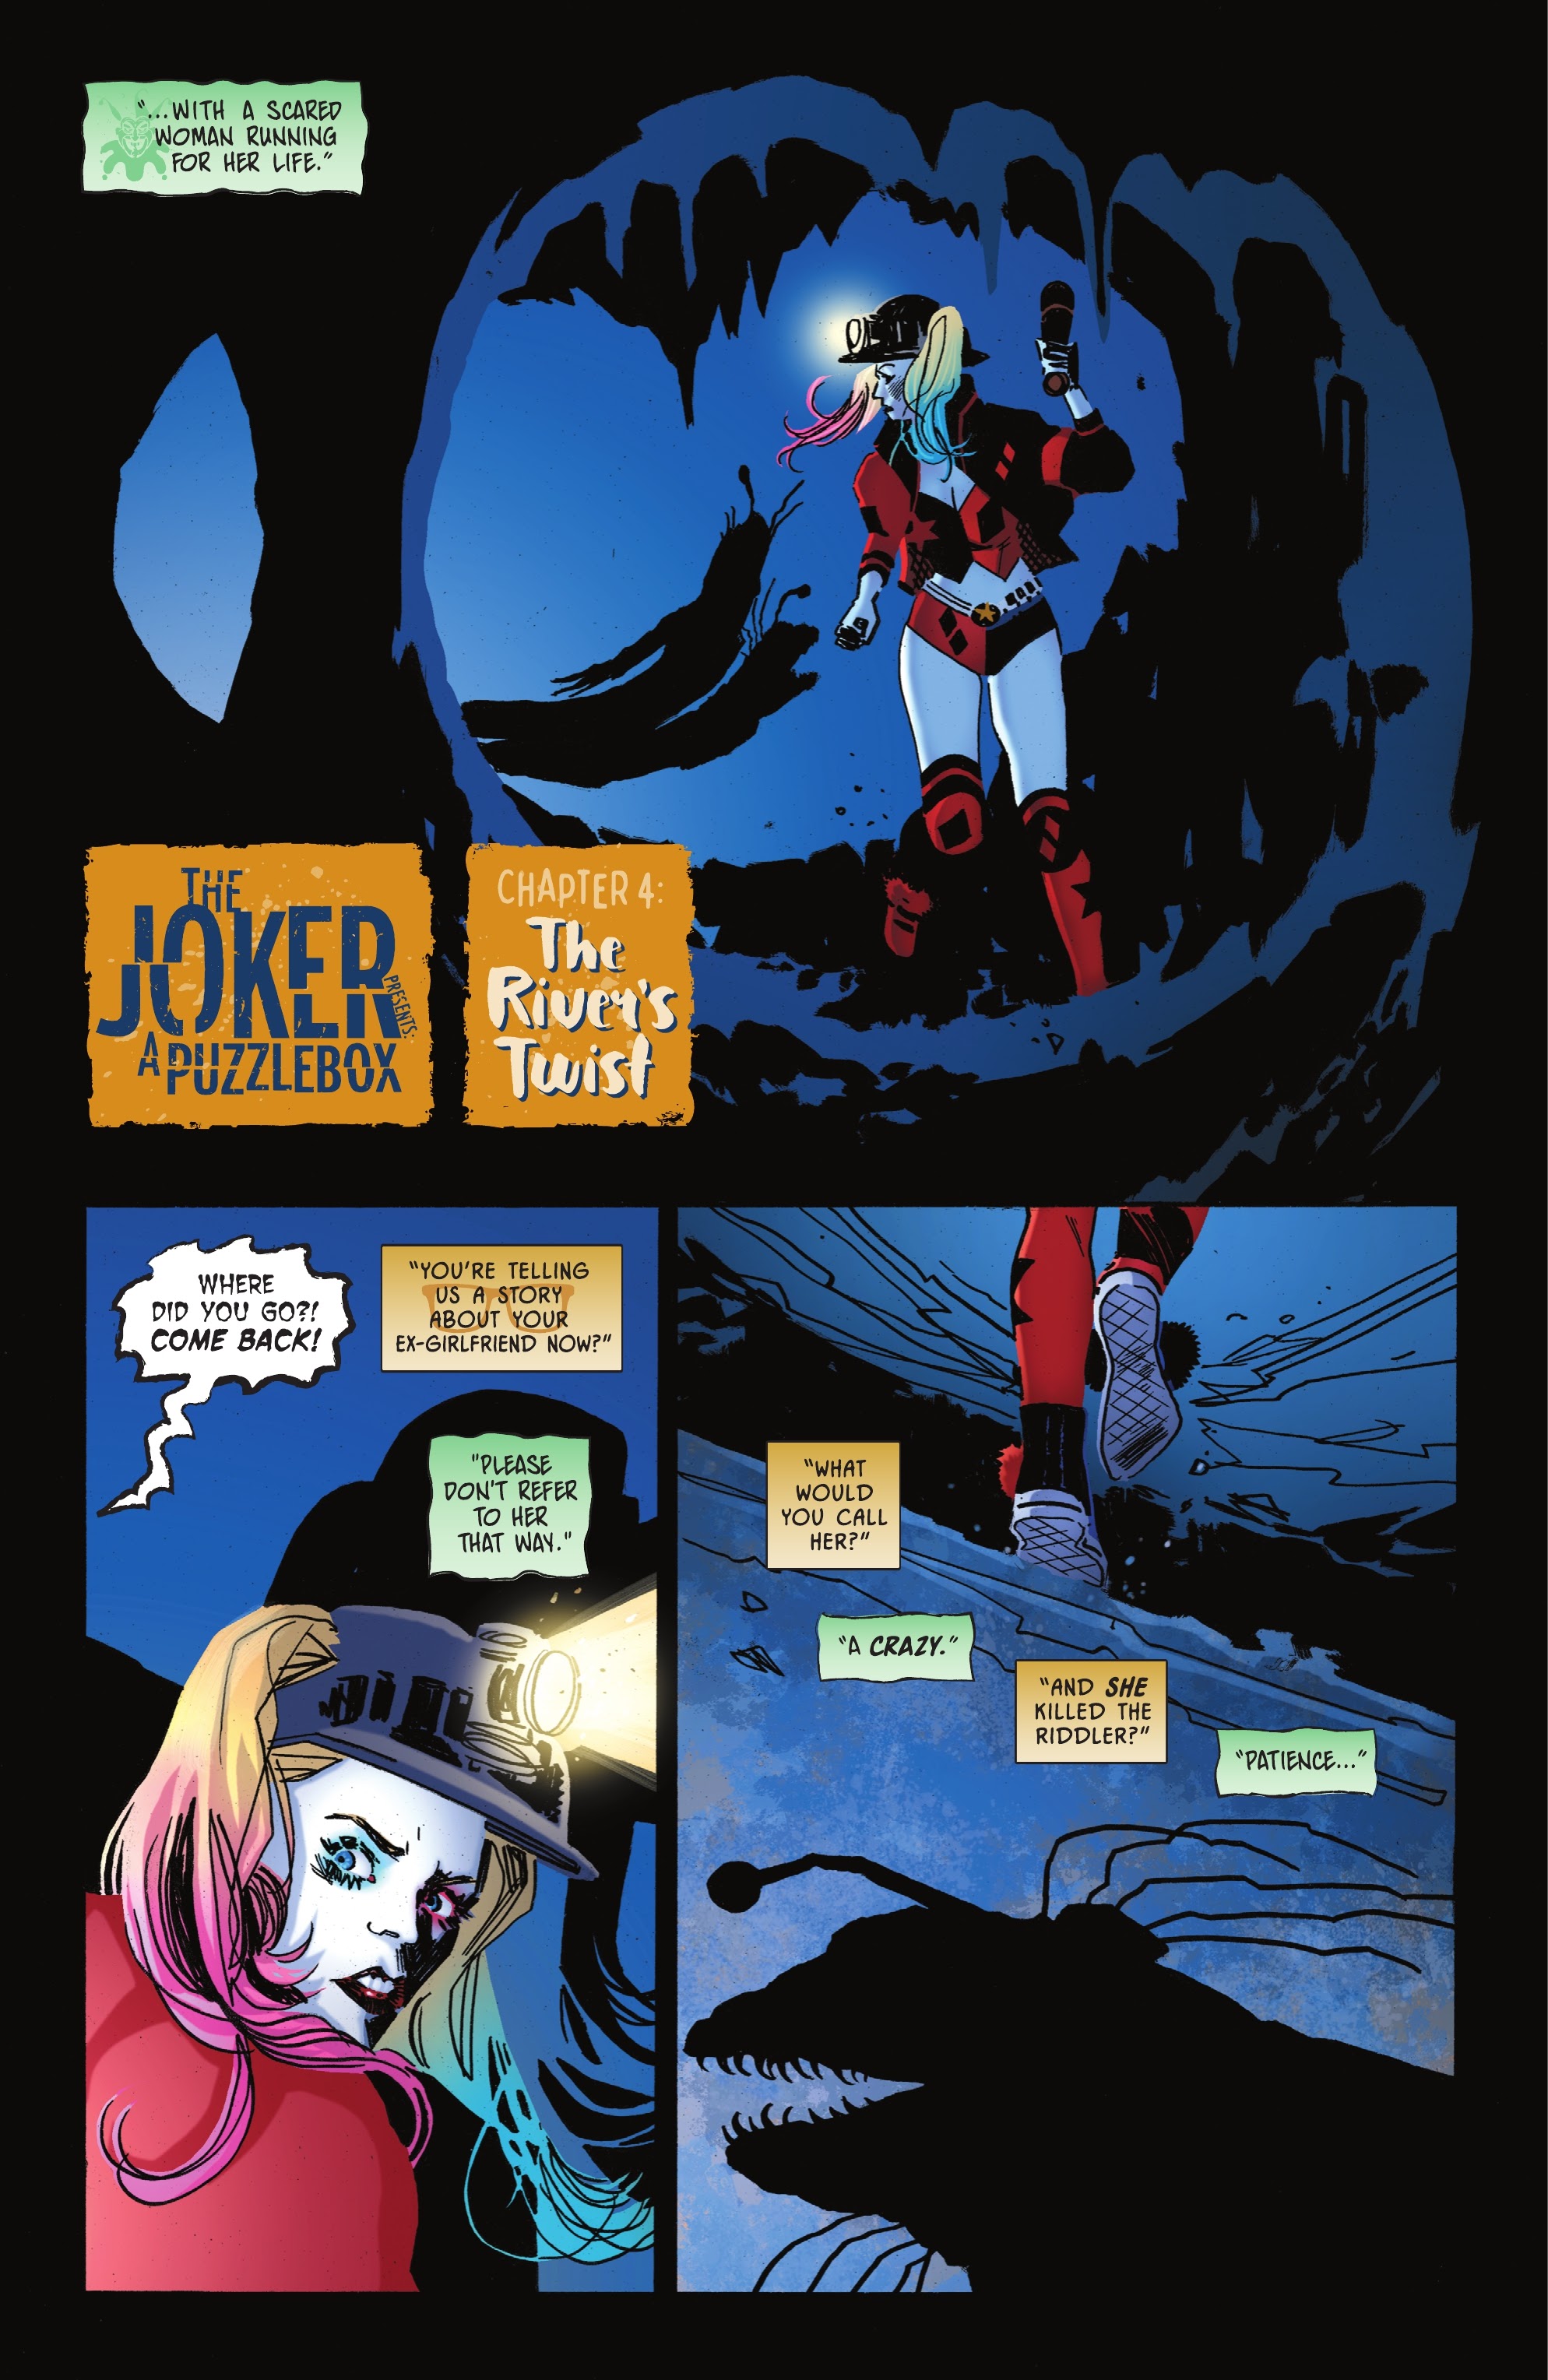 Read online The Joker Presents: A Puzzlebox comic -  Issue #4 - 3